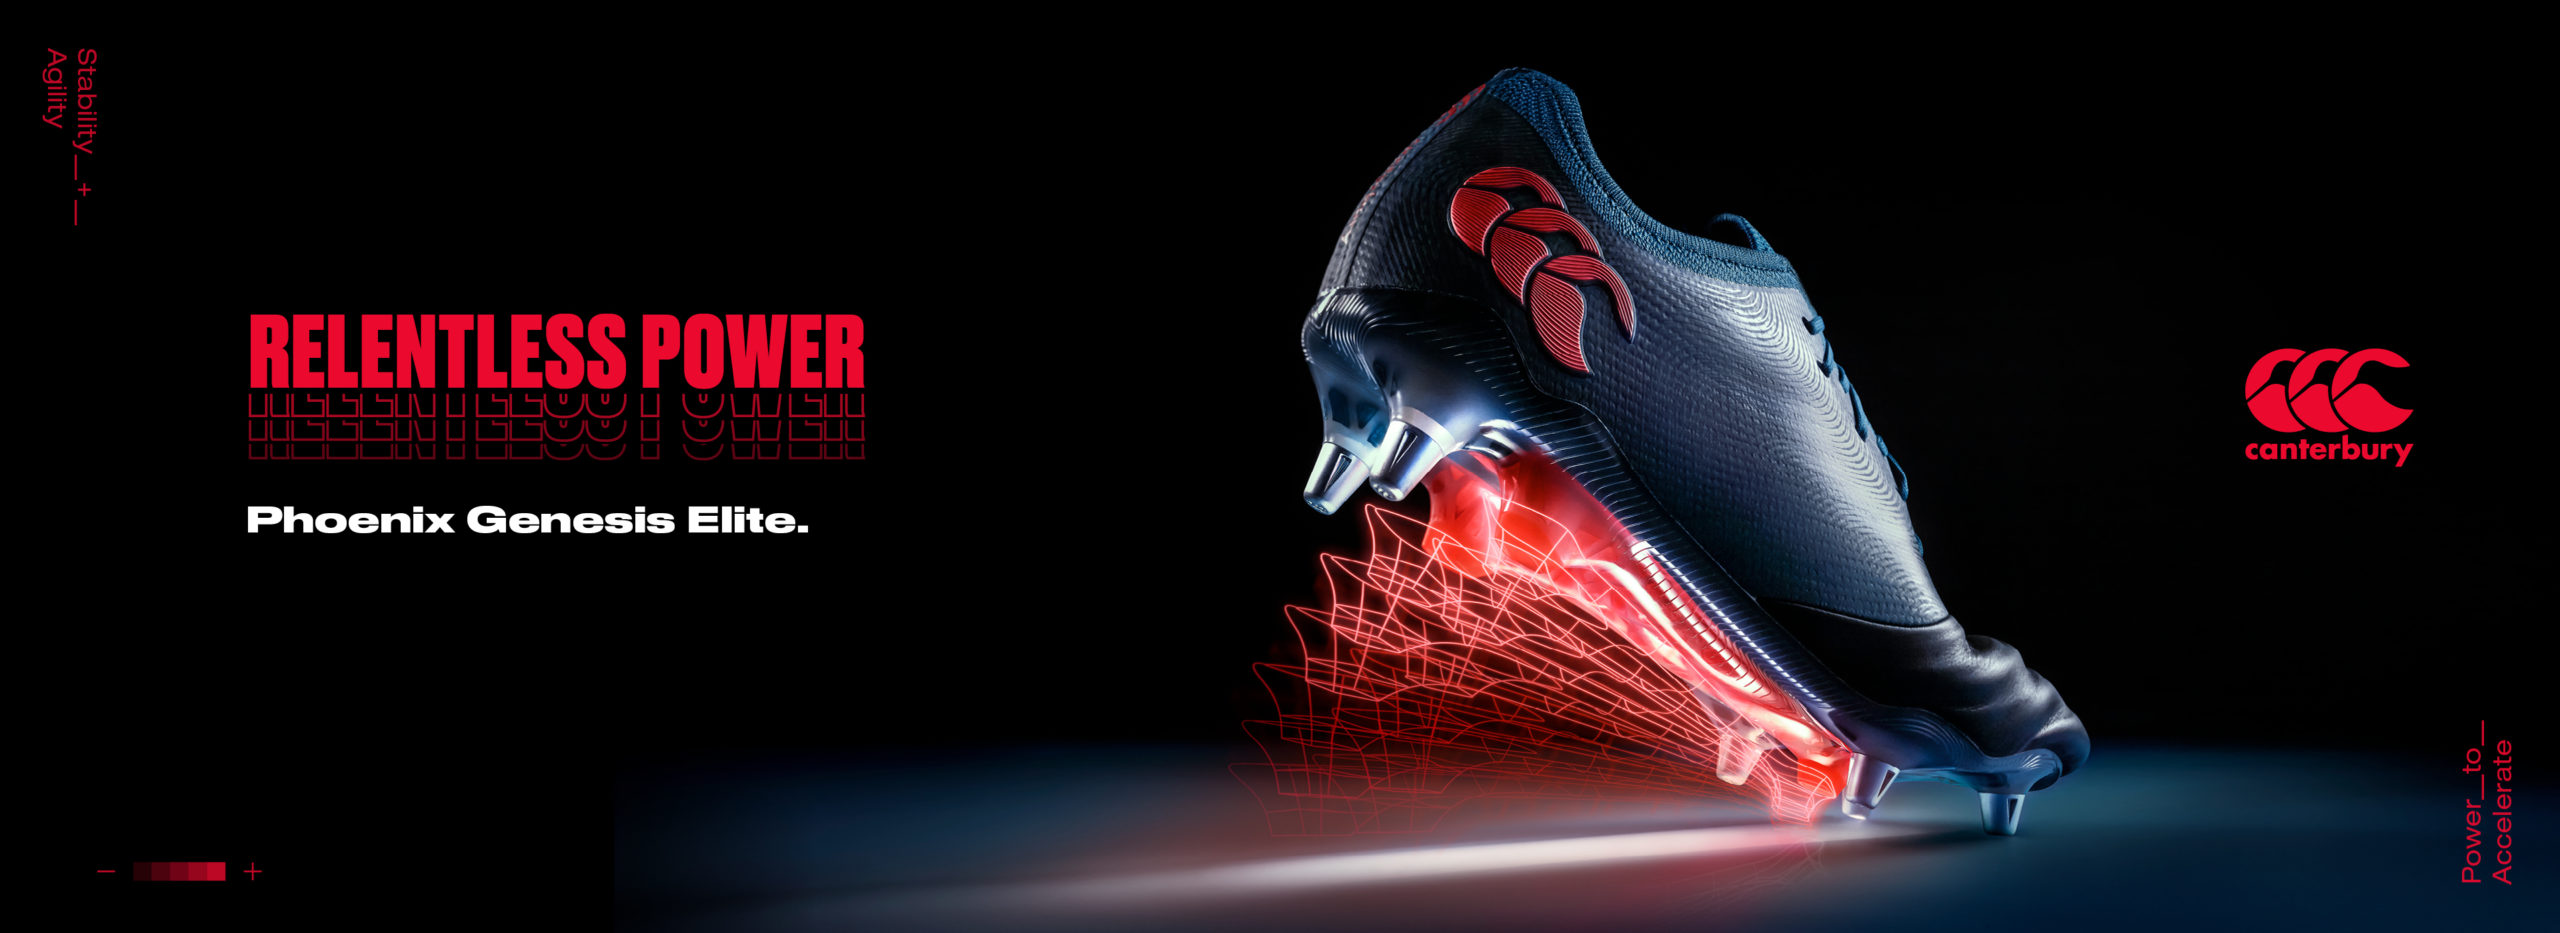 Rugby players can ditch their football boots – Canterbury is launching its most advanced rugby boot ever